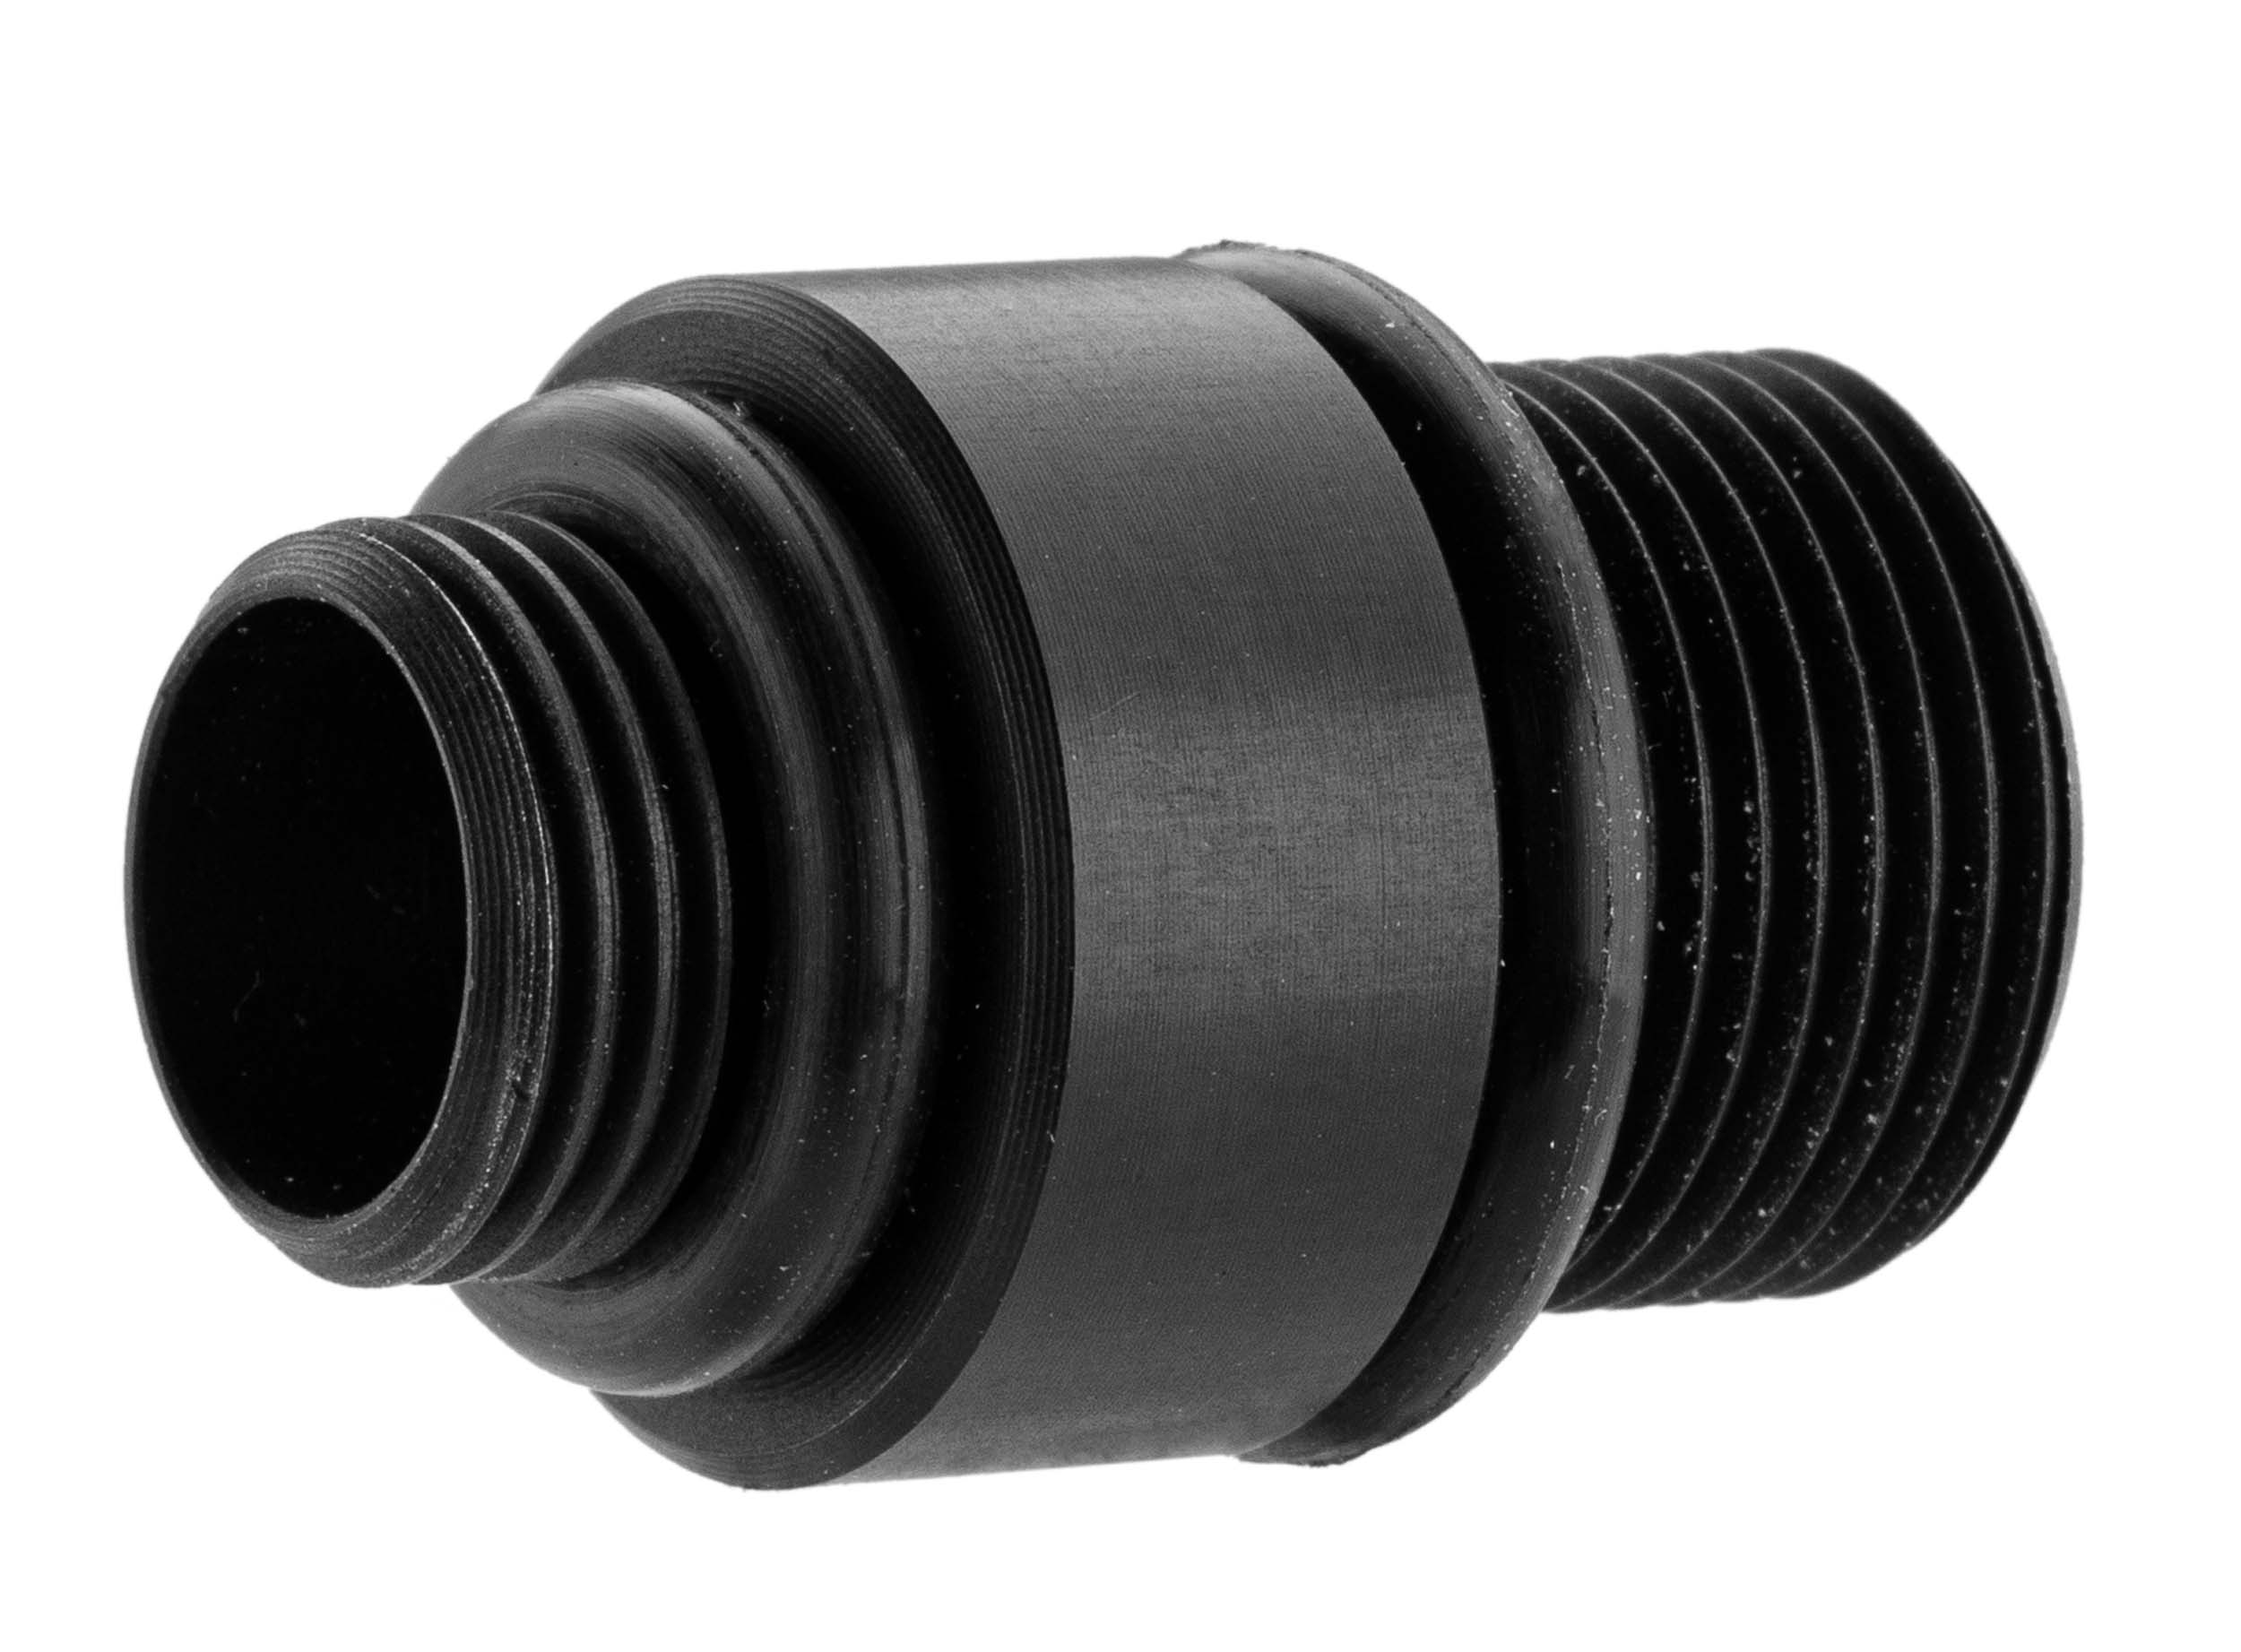 Adaptateur silencieux 11mm+ vers 14mm- BO Manufacture